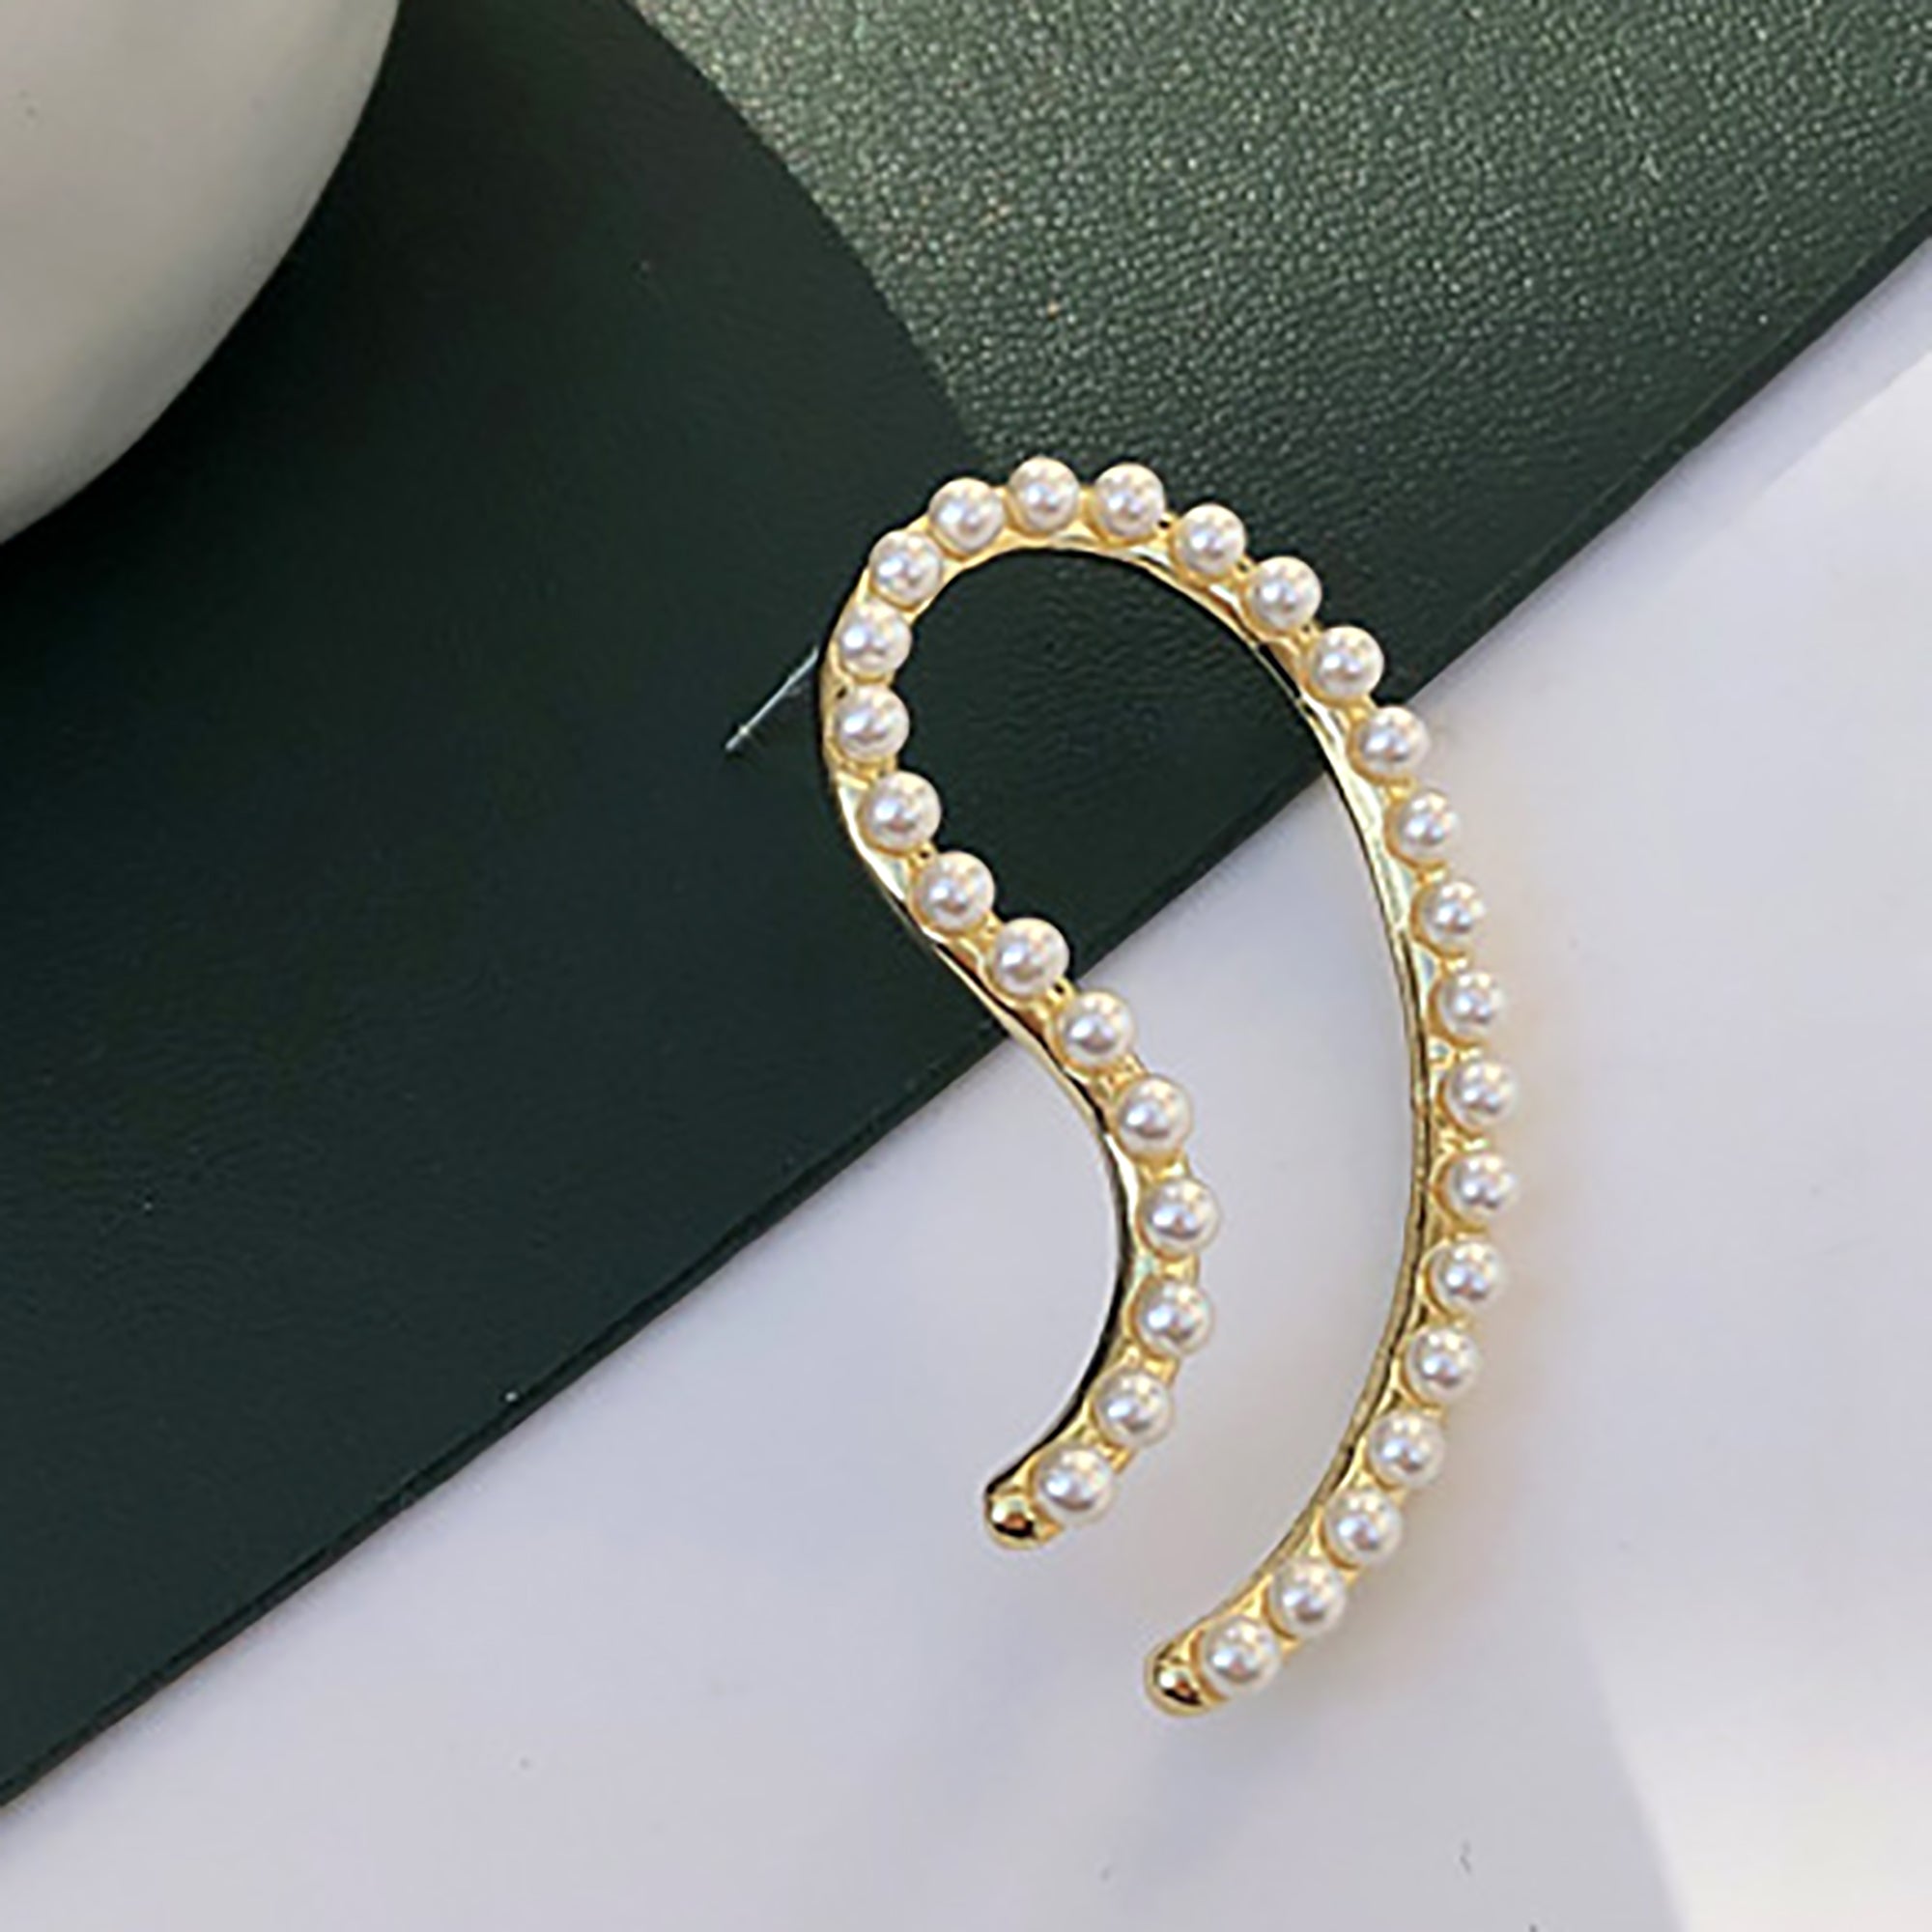 Gold Plated w/ Pearl Ear Cuff Designer Earrings Valentine Day Gift birthday party anniversary